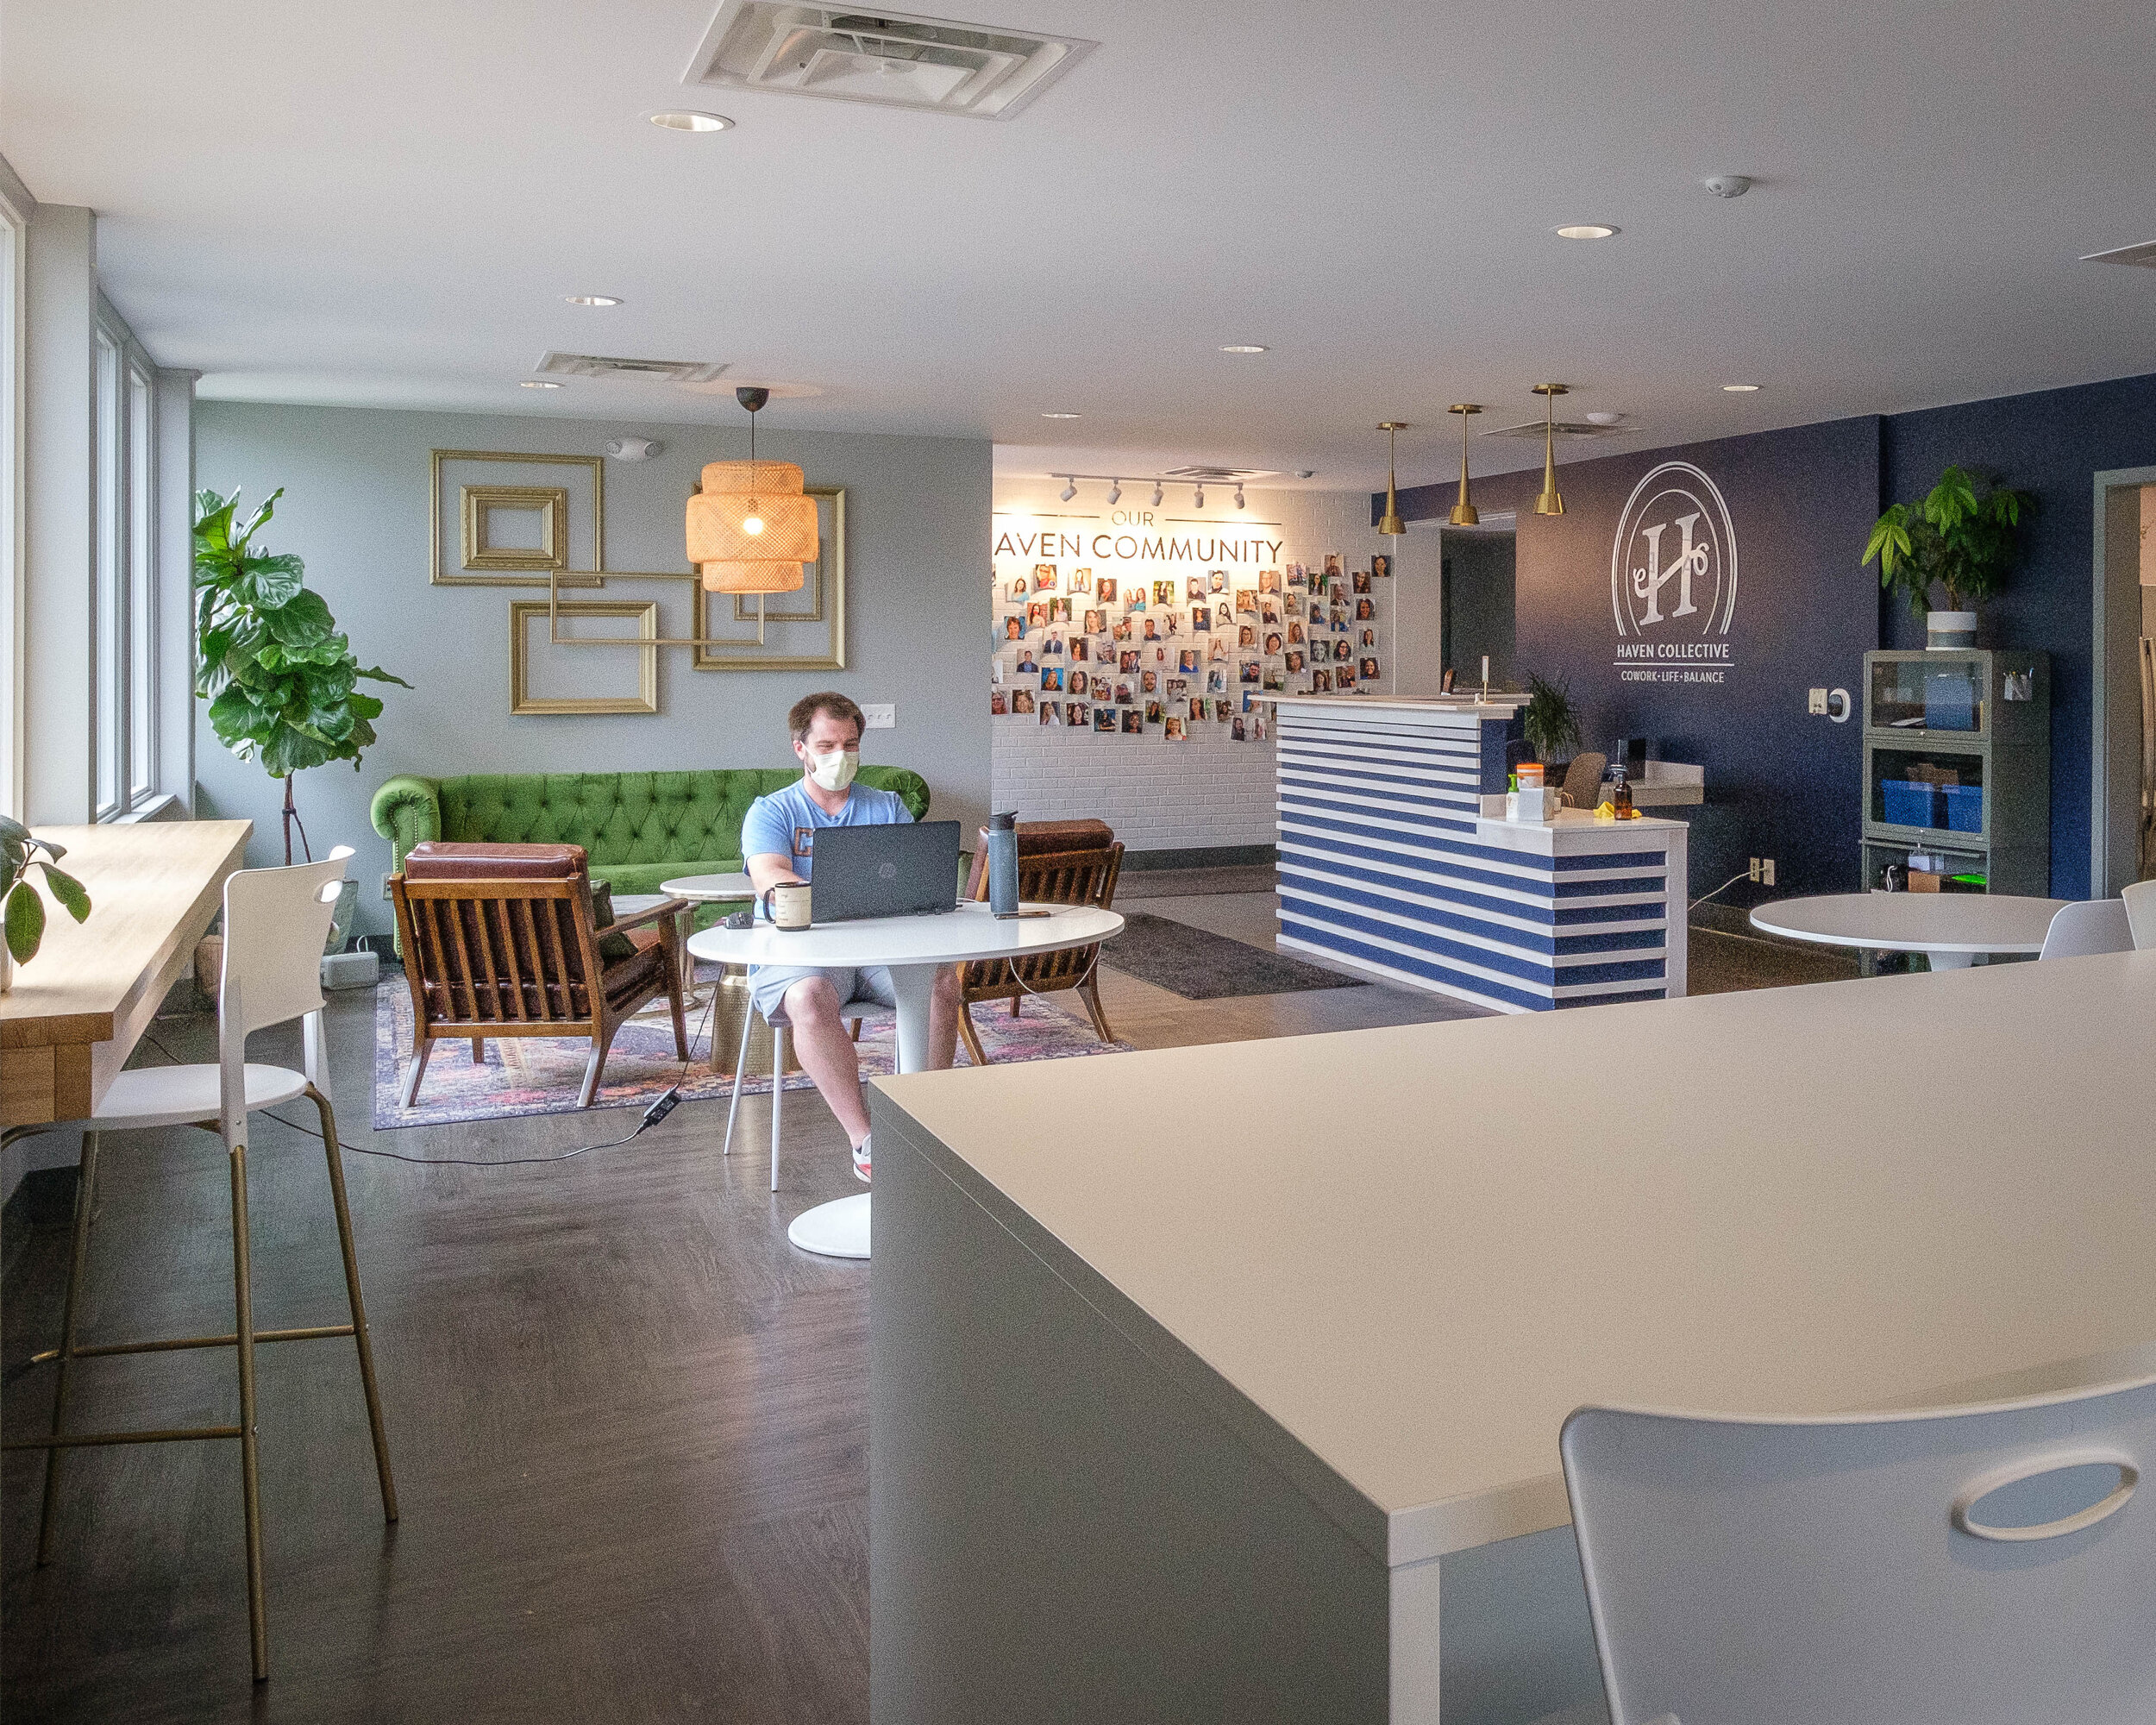  There is an abundance of space throughout our locations in Upper Arlington and Downtown Columbus where you can settle in and get sh!t done. Depending on how you work best, there are quiet spaces to focus and more lively spaces with music and movemen